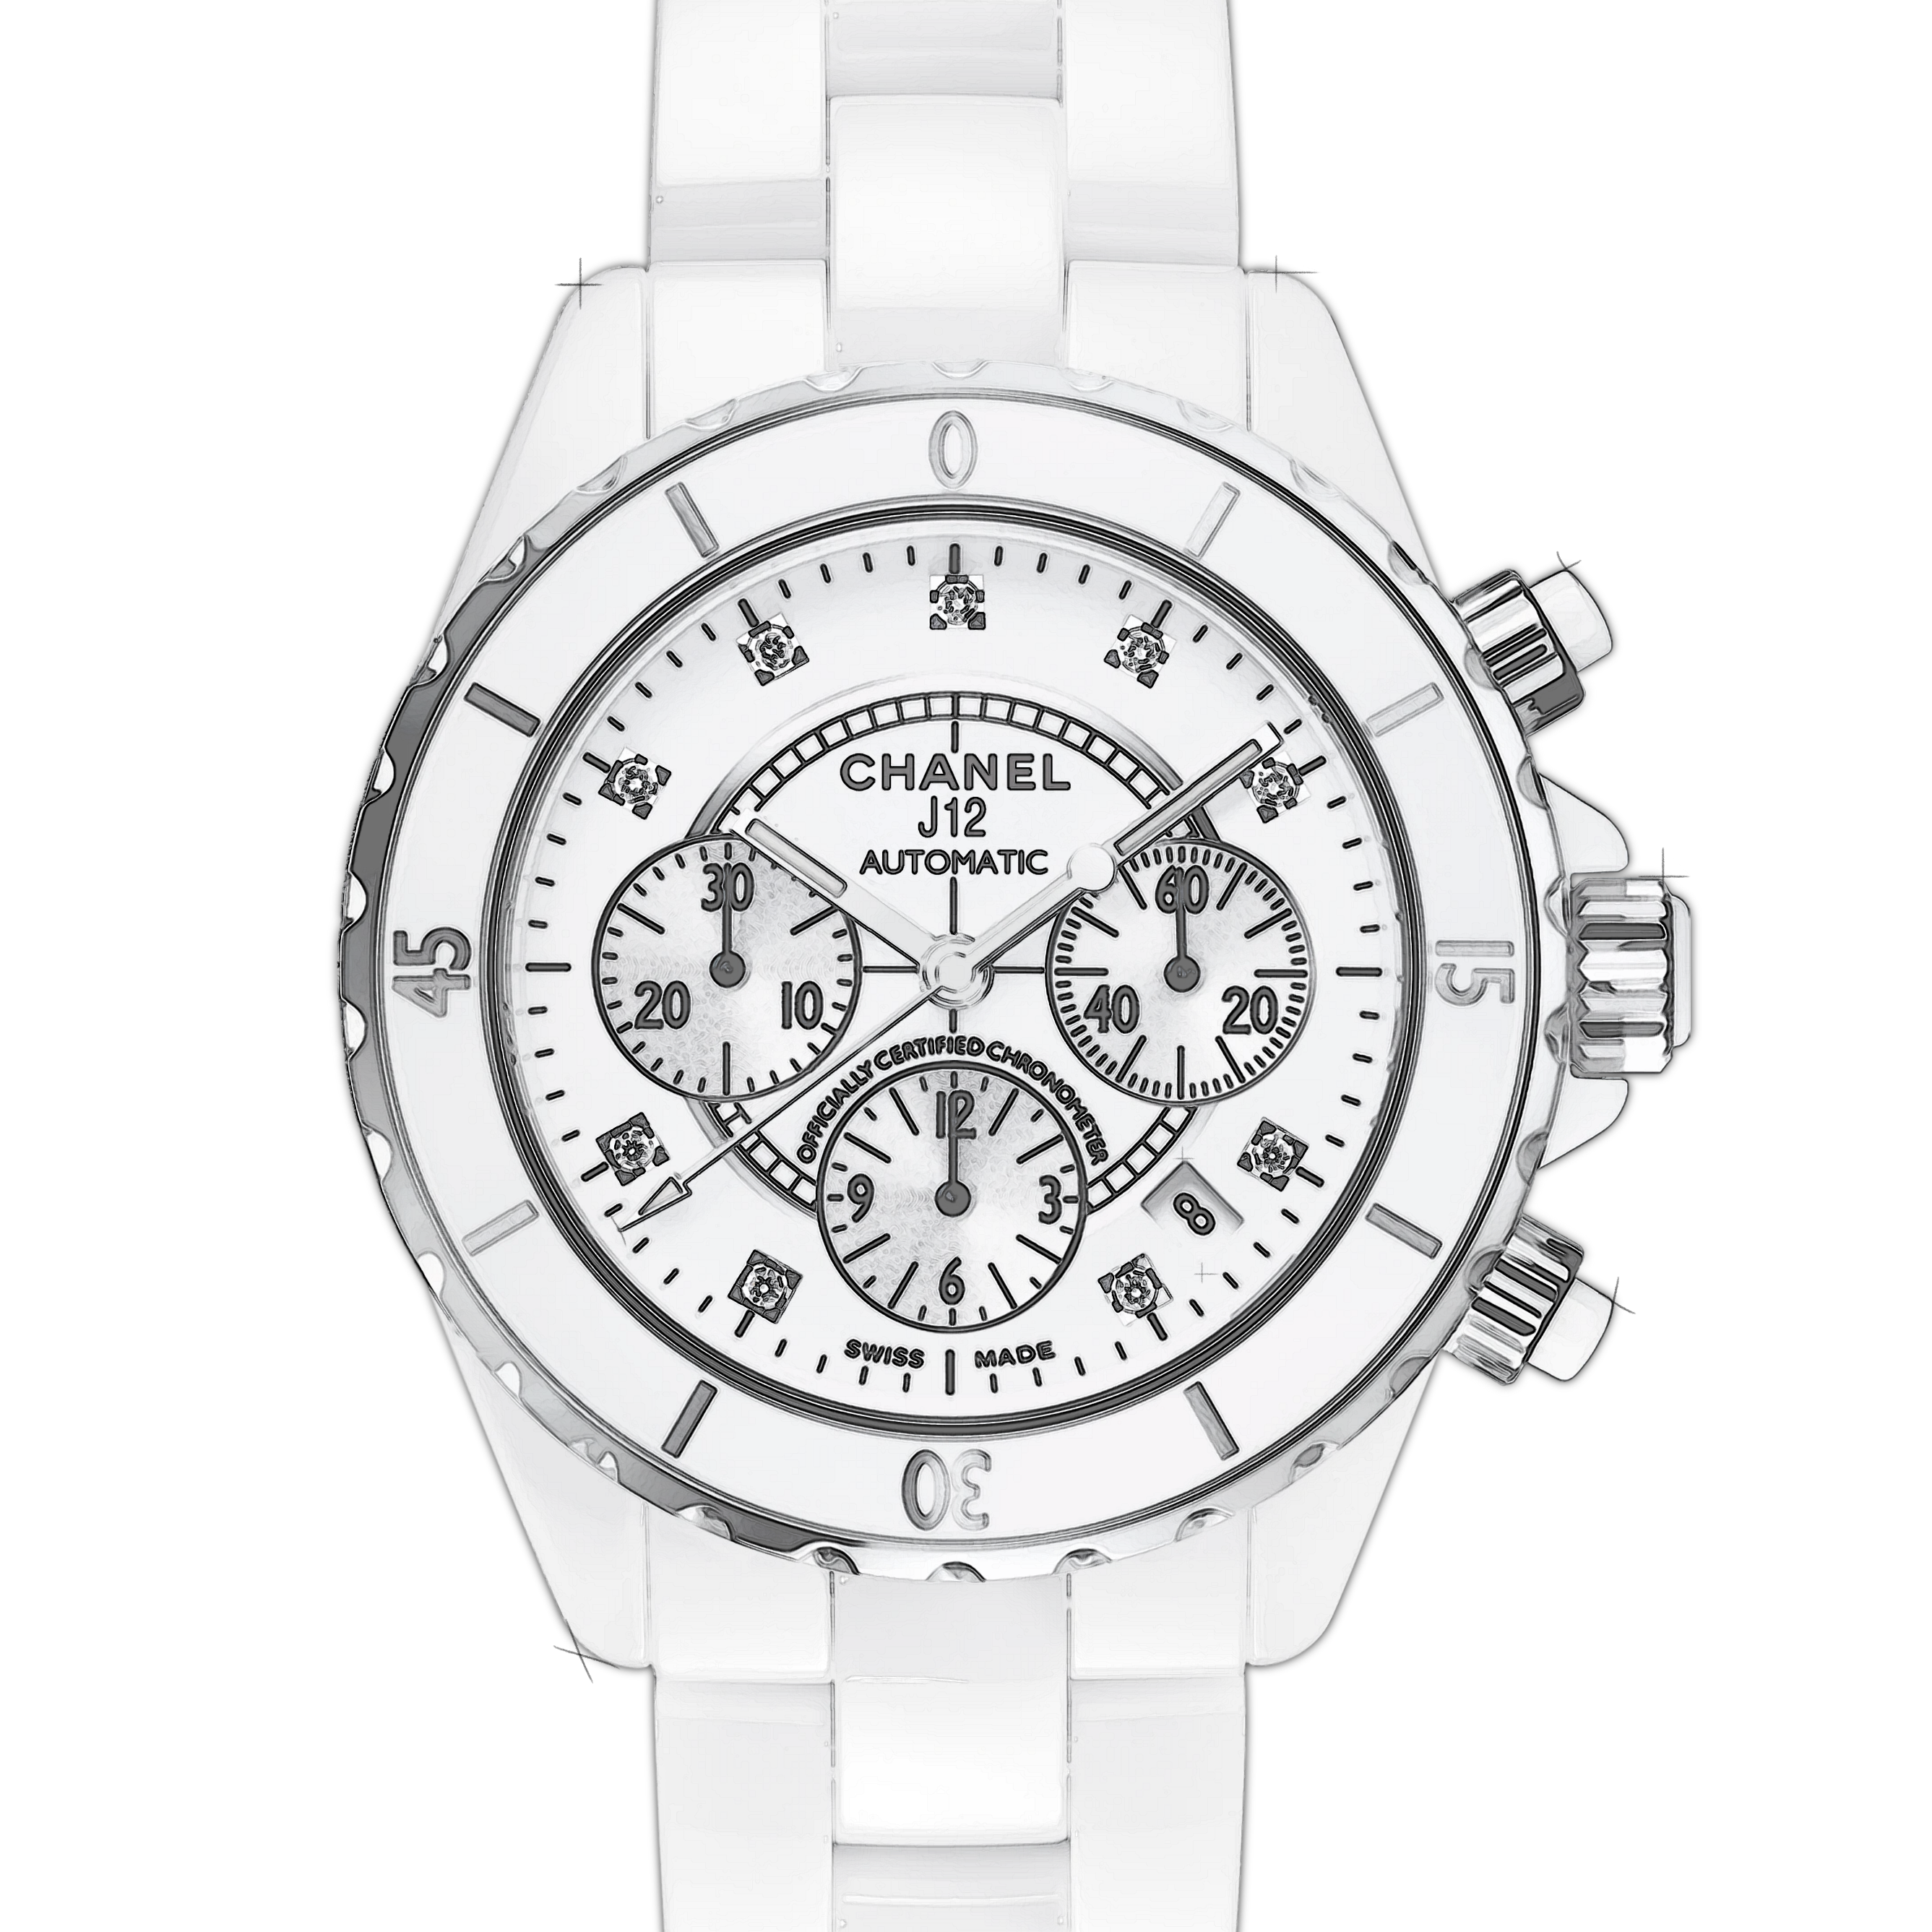 Buy Chanel Watches  Chanel Watches UK